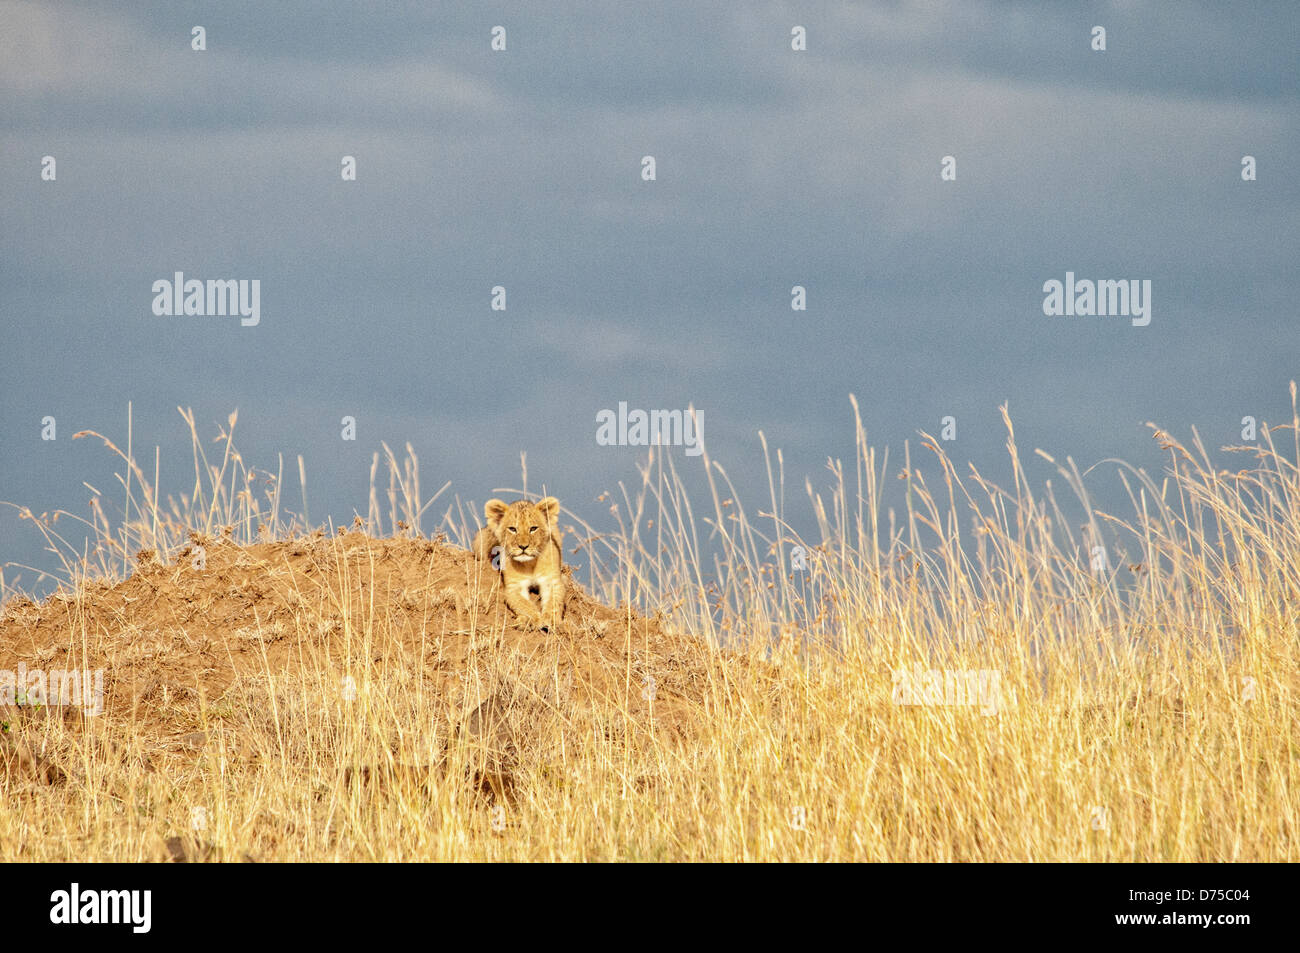 small-lion-cub-panthera-leo-in-tall-gras